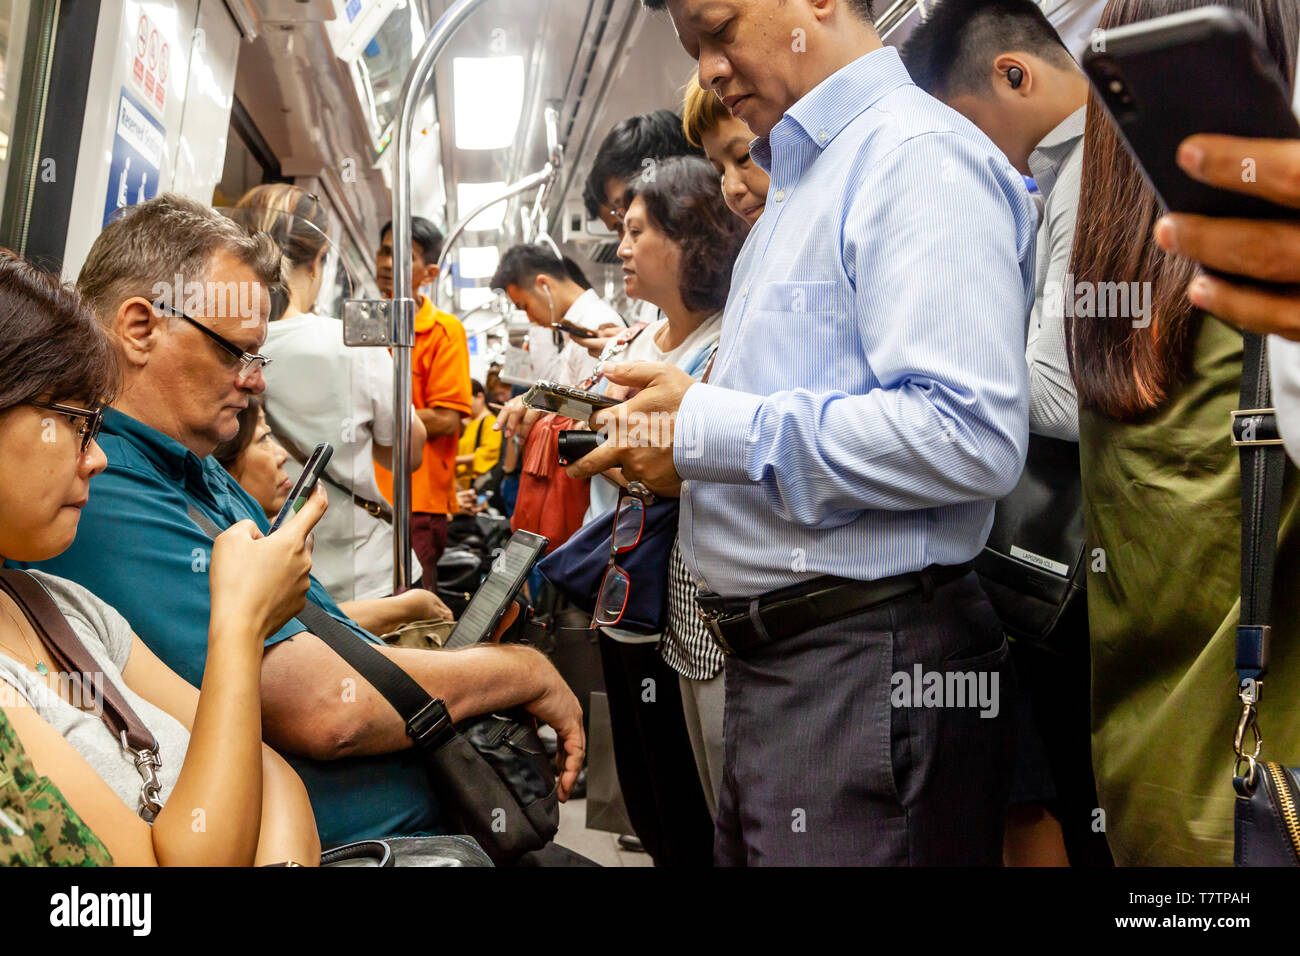 People Looking At Their Smartphones On The MRT, Singapore, South East Asia Stock Photo